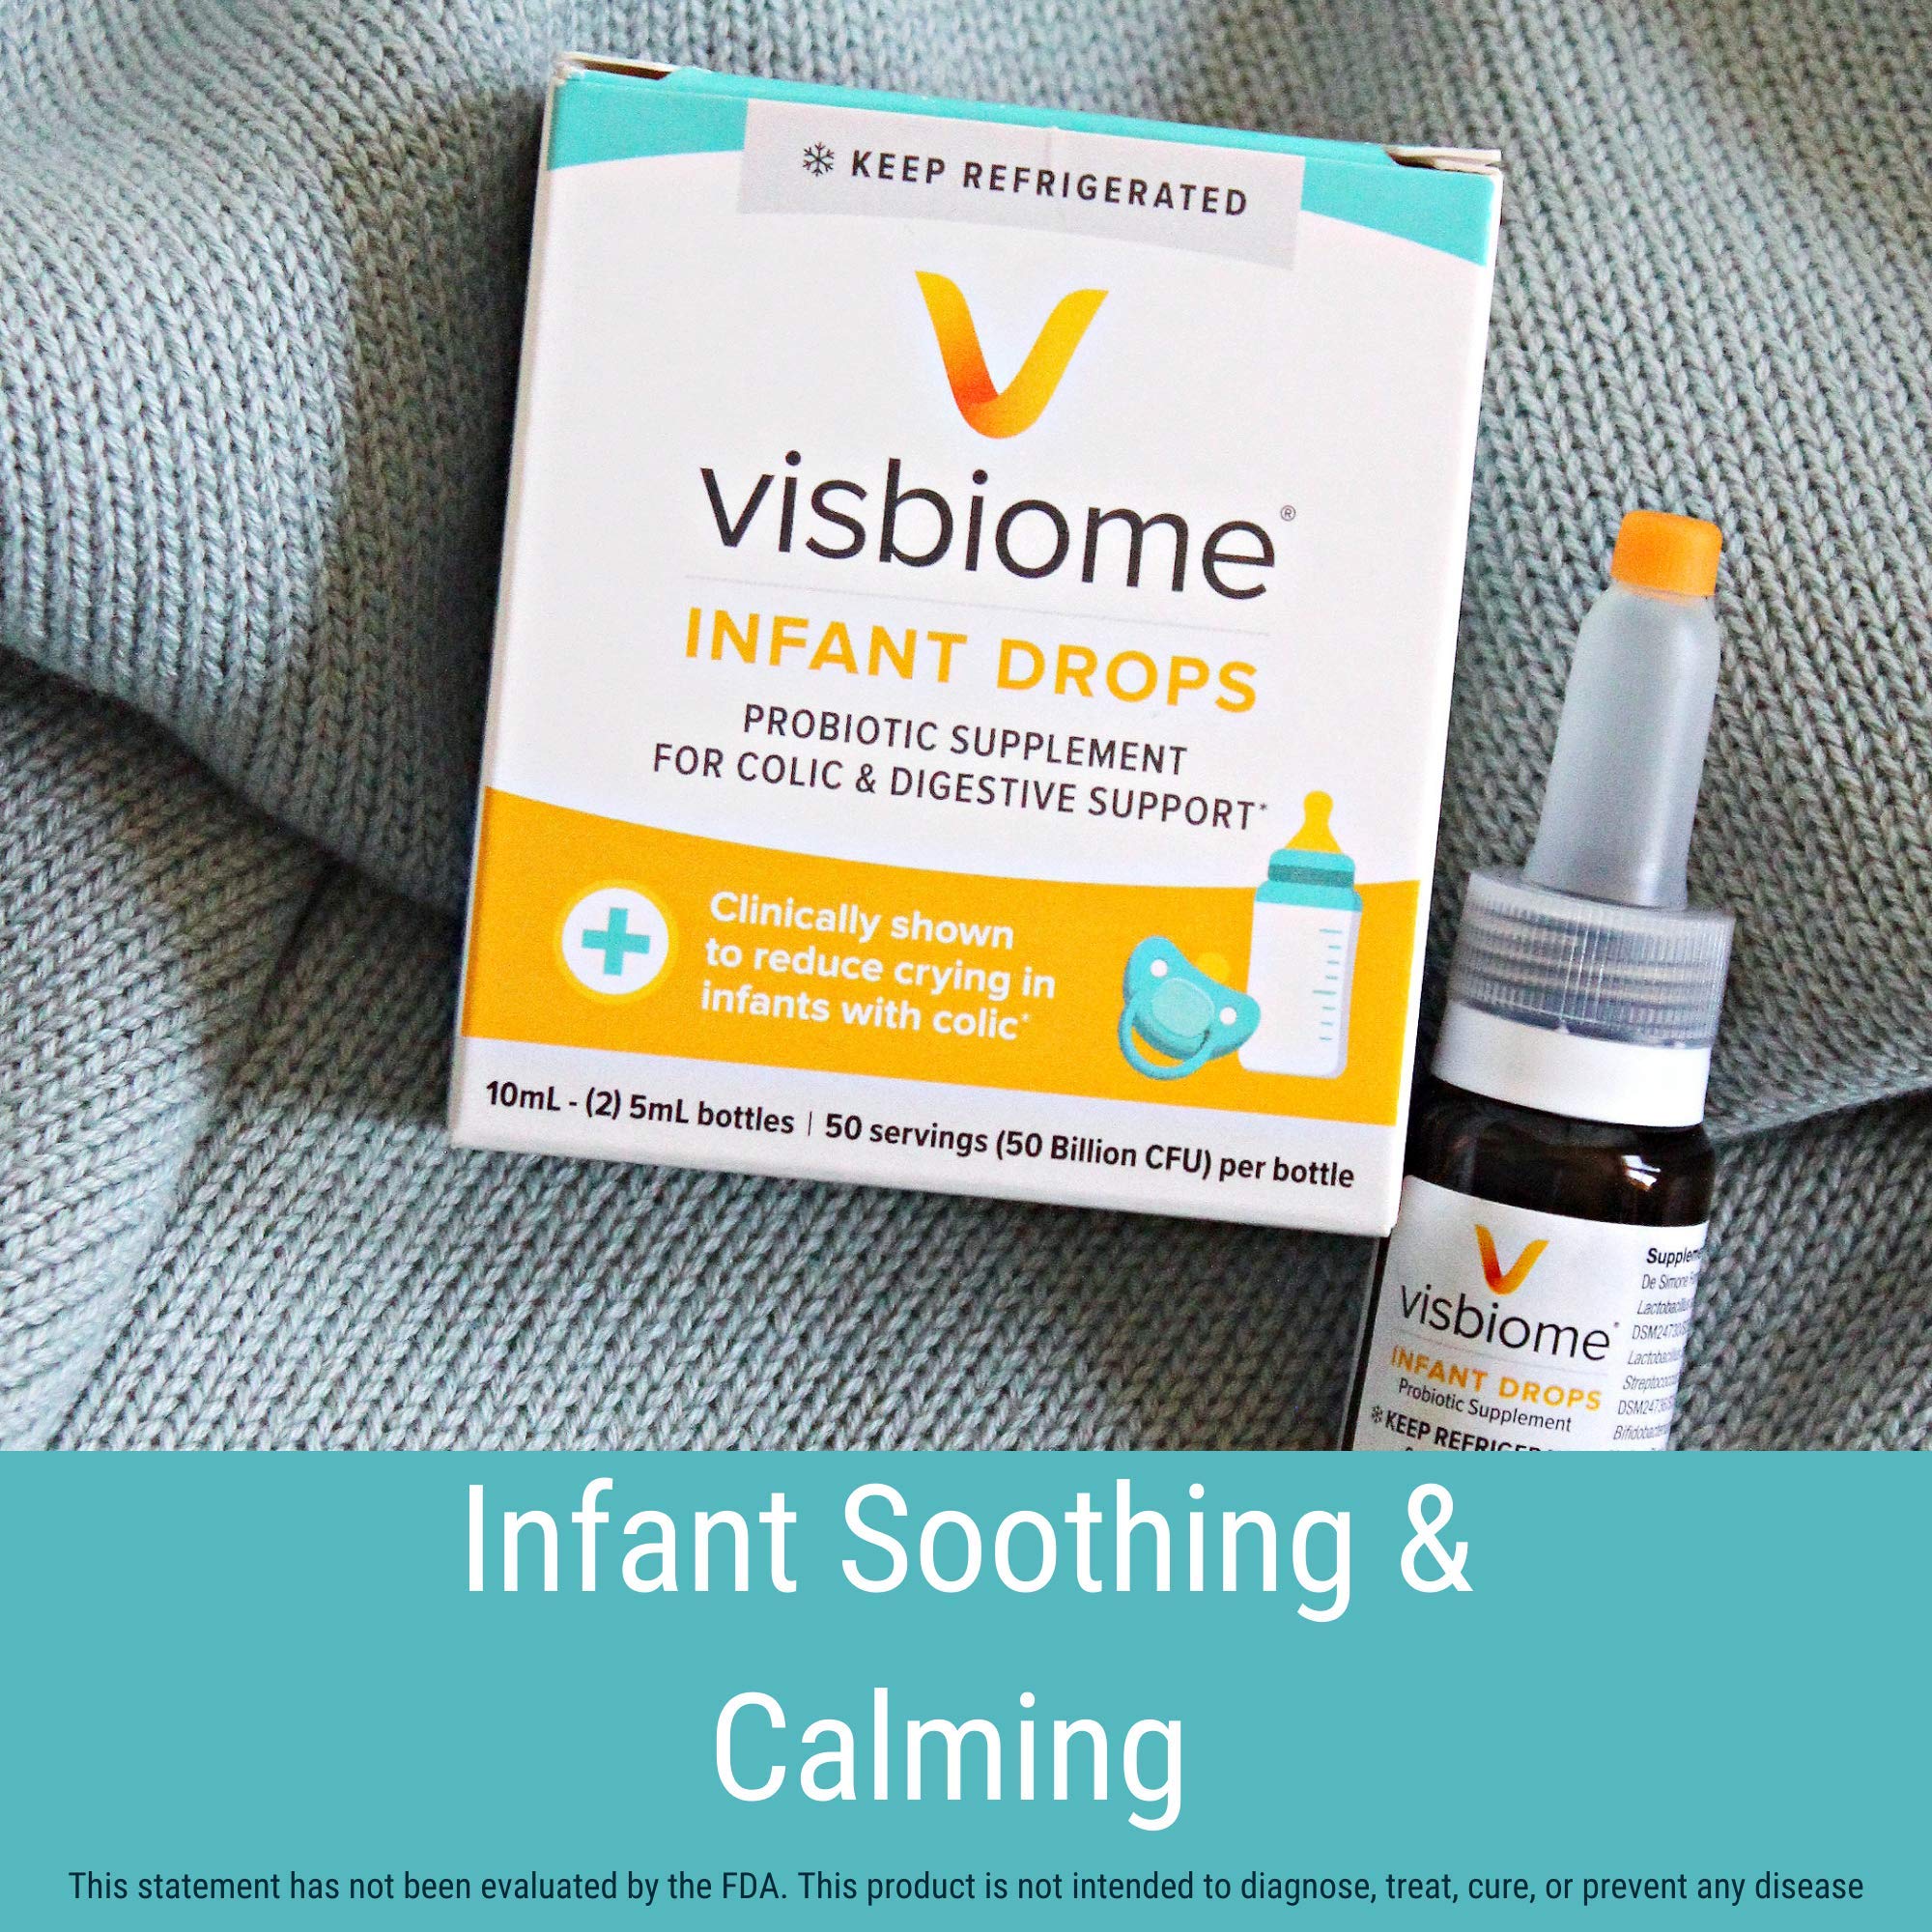 Visbiome® Infant Drops, Probiotic Supplement for Colic & Digestive Support, 10 mL, 50 Servings - Shipped Cold in Recyclable Cooler with Temperature Monitor, (2-Pack)